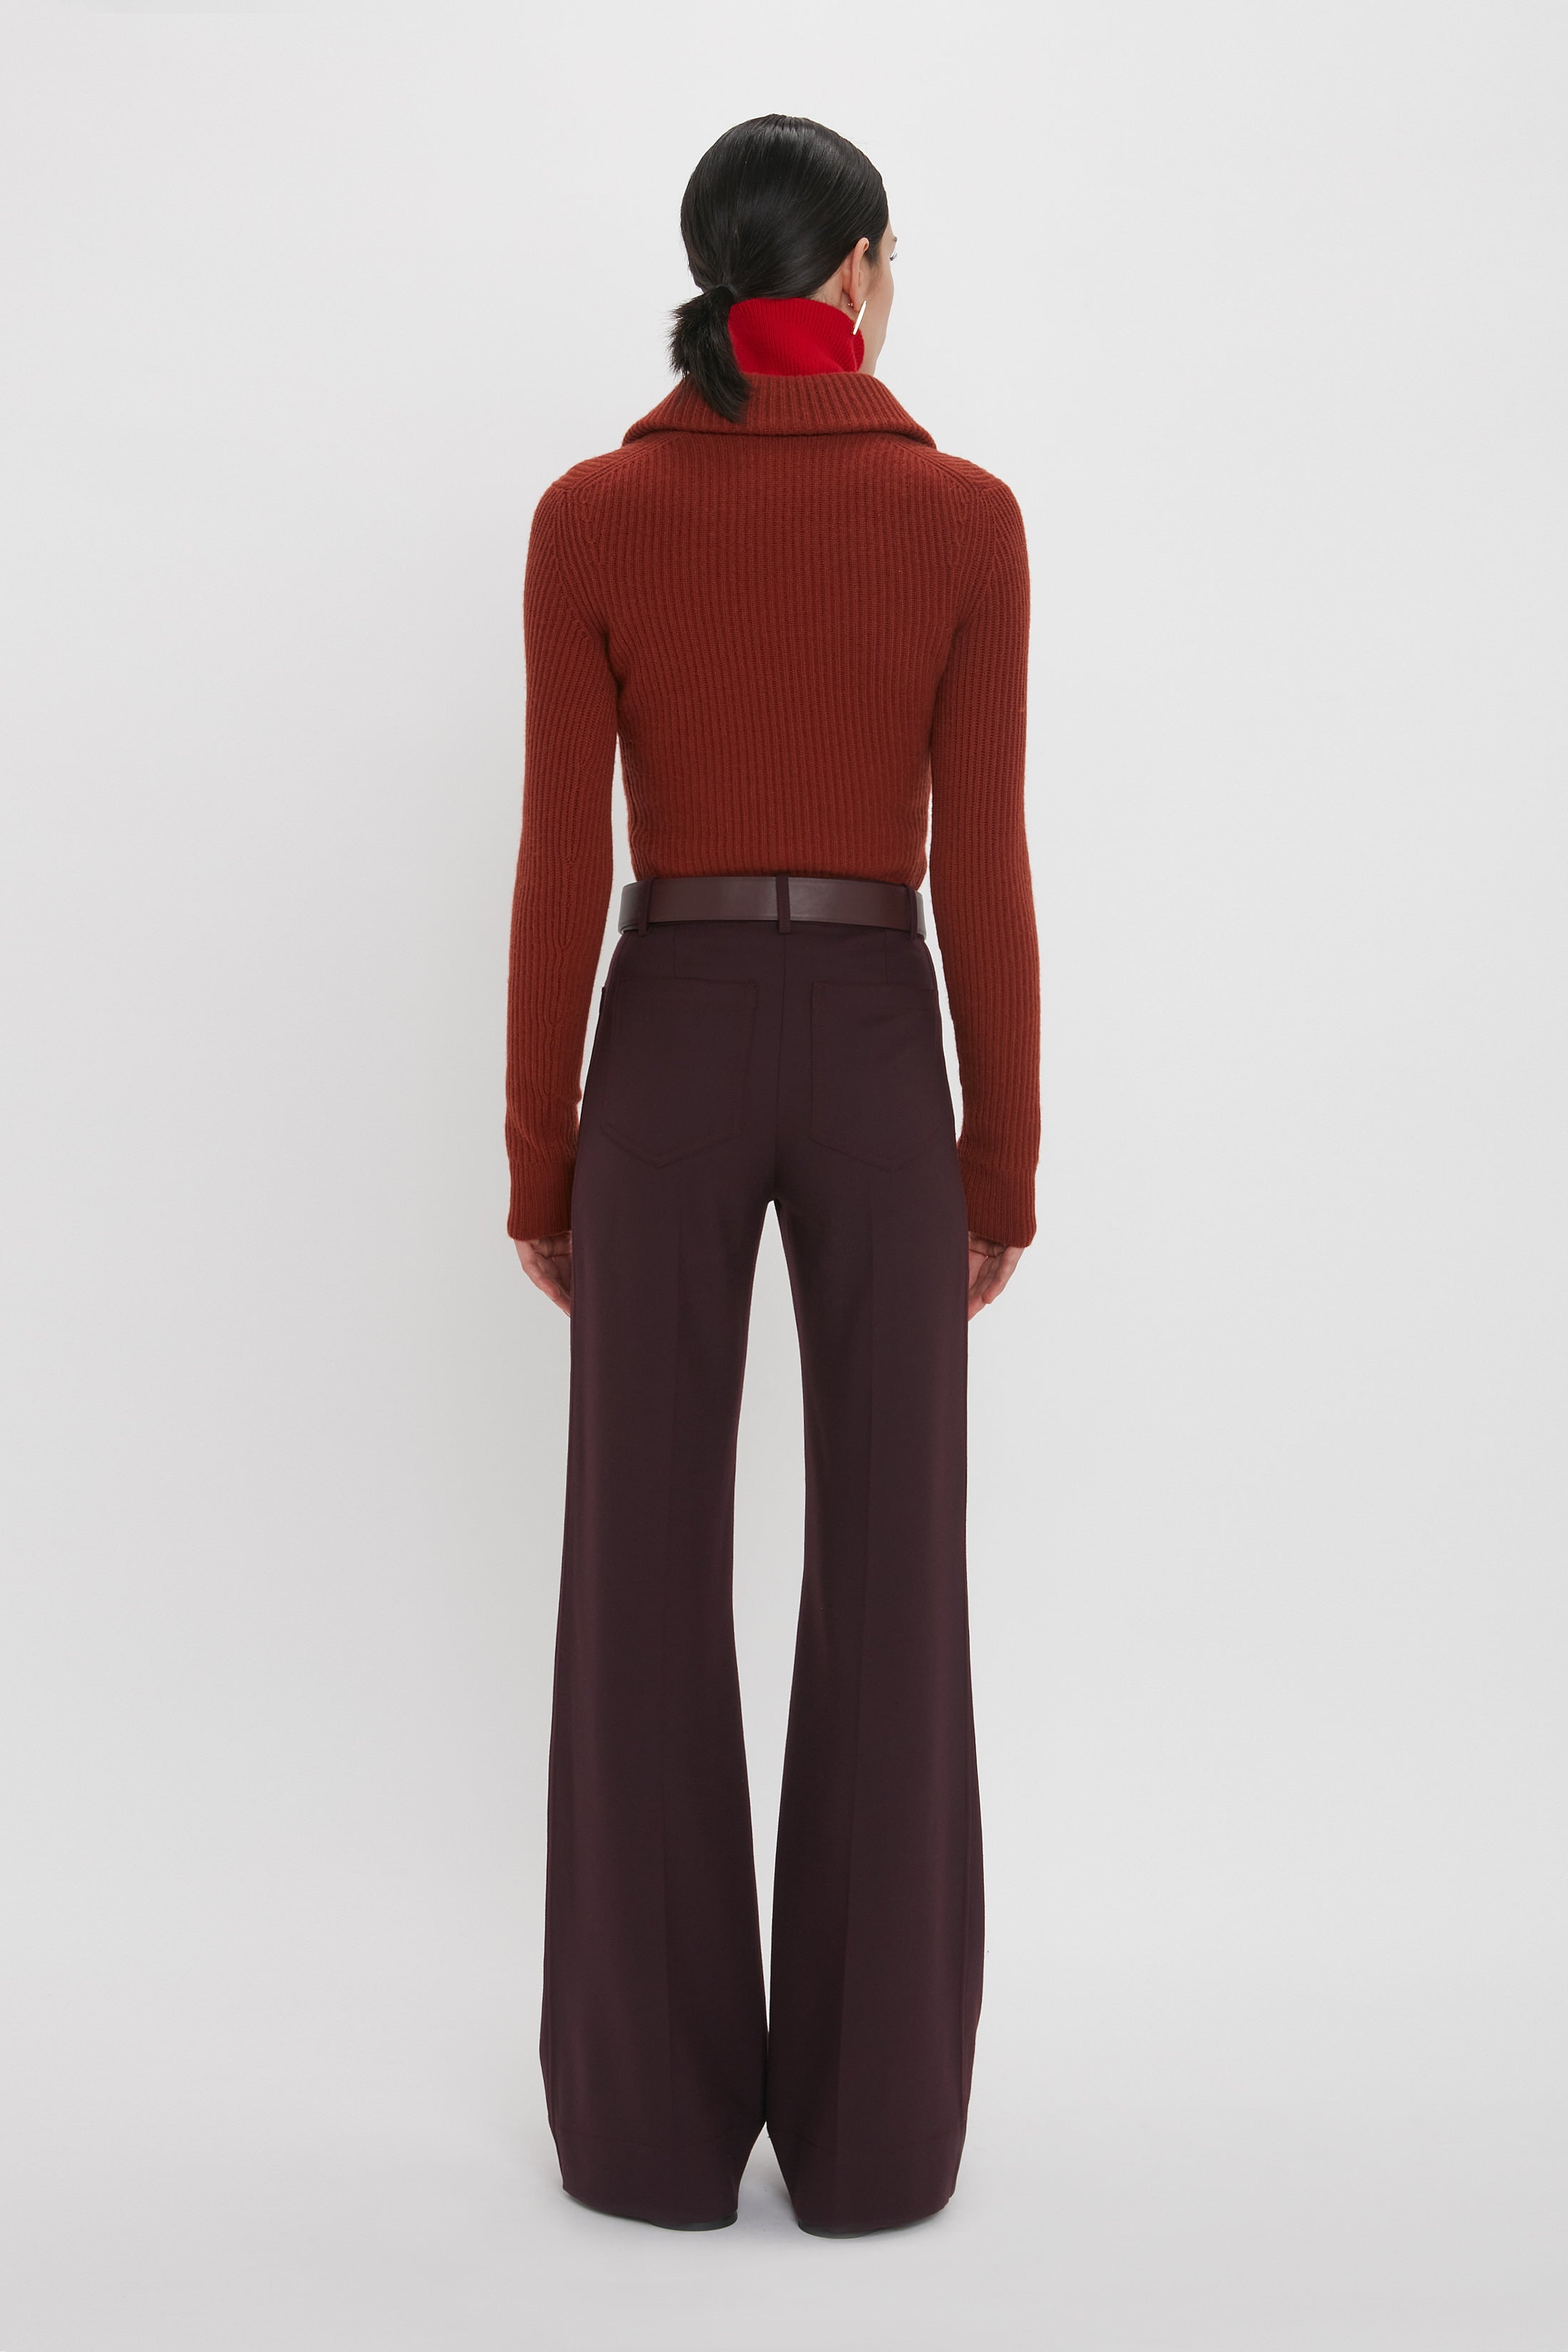 Double Collared Jumper In Russet - 5